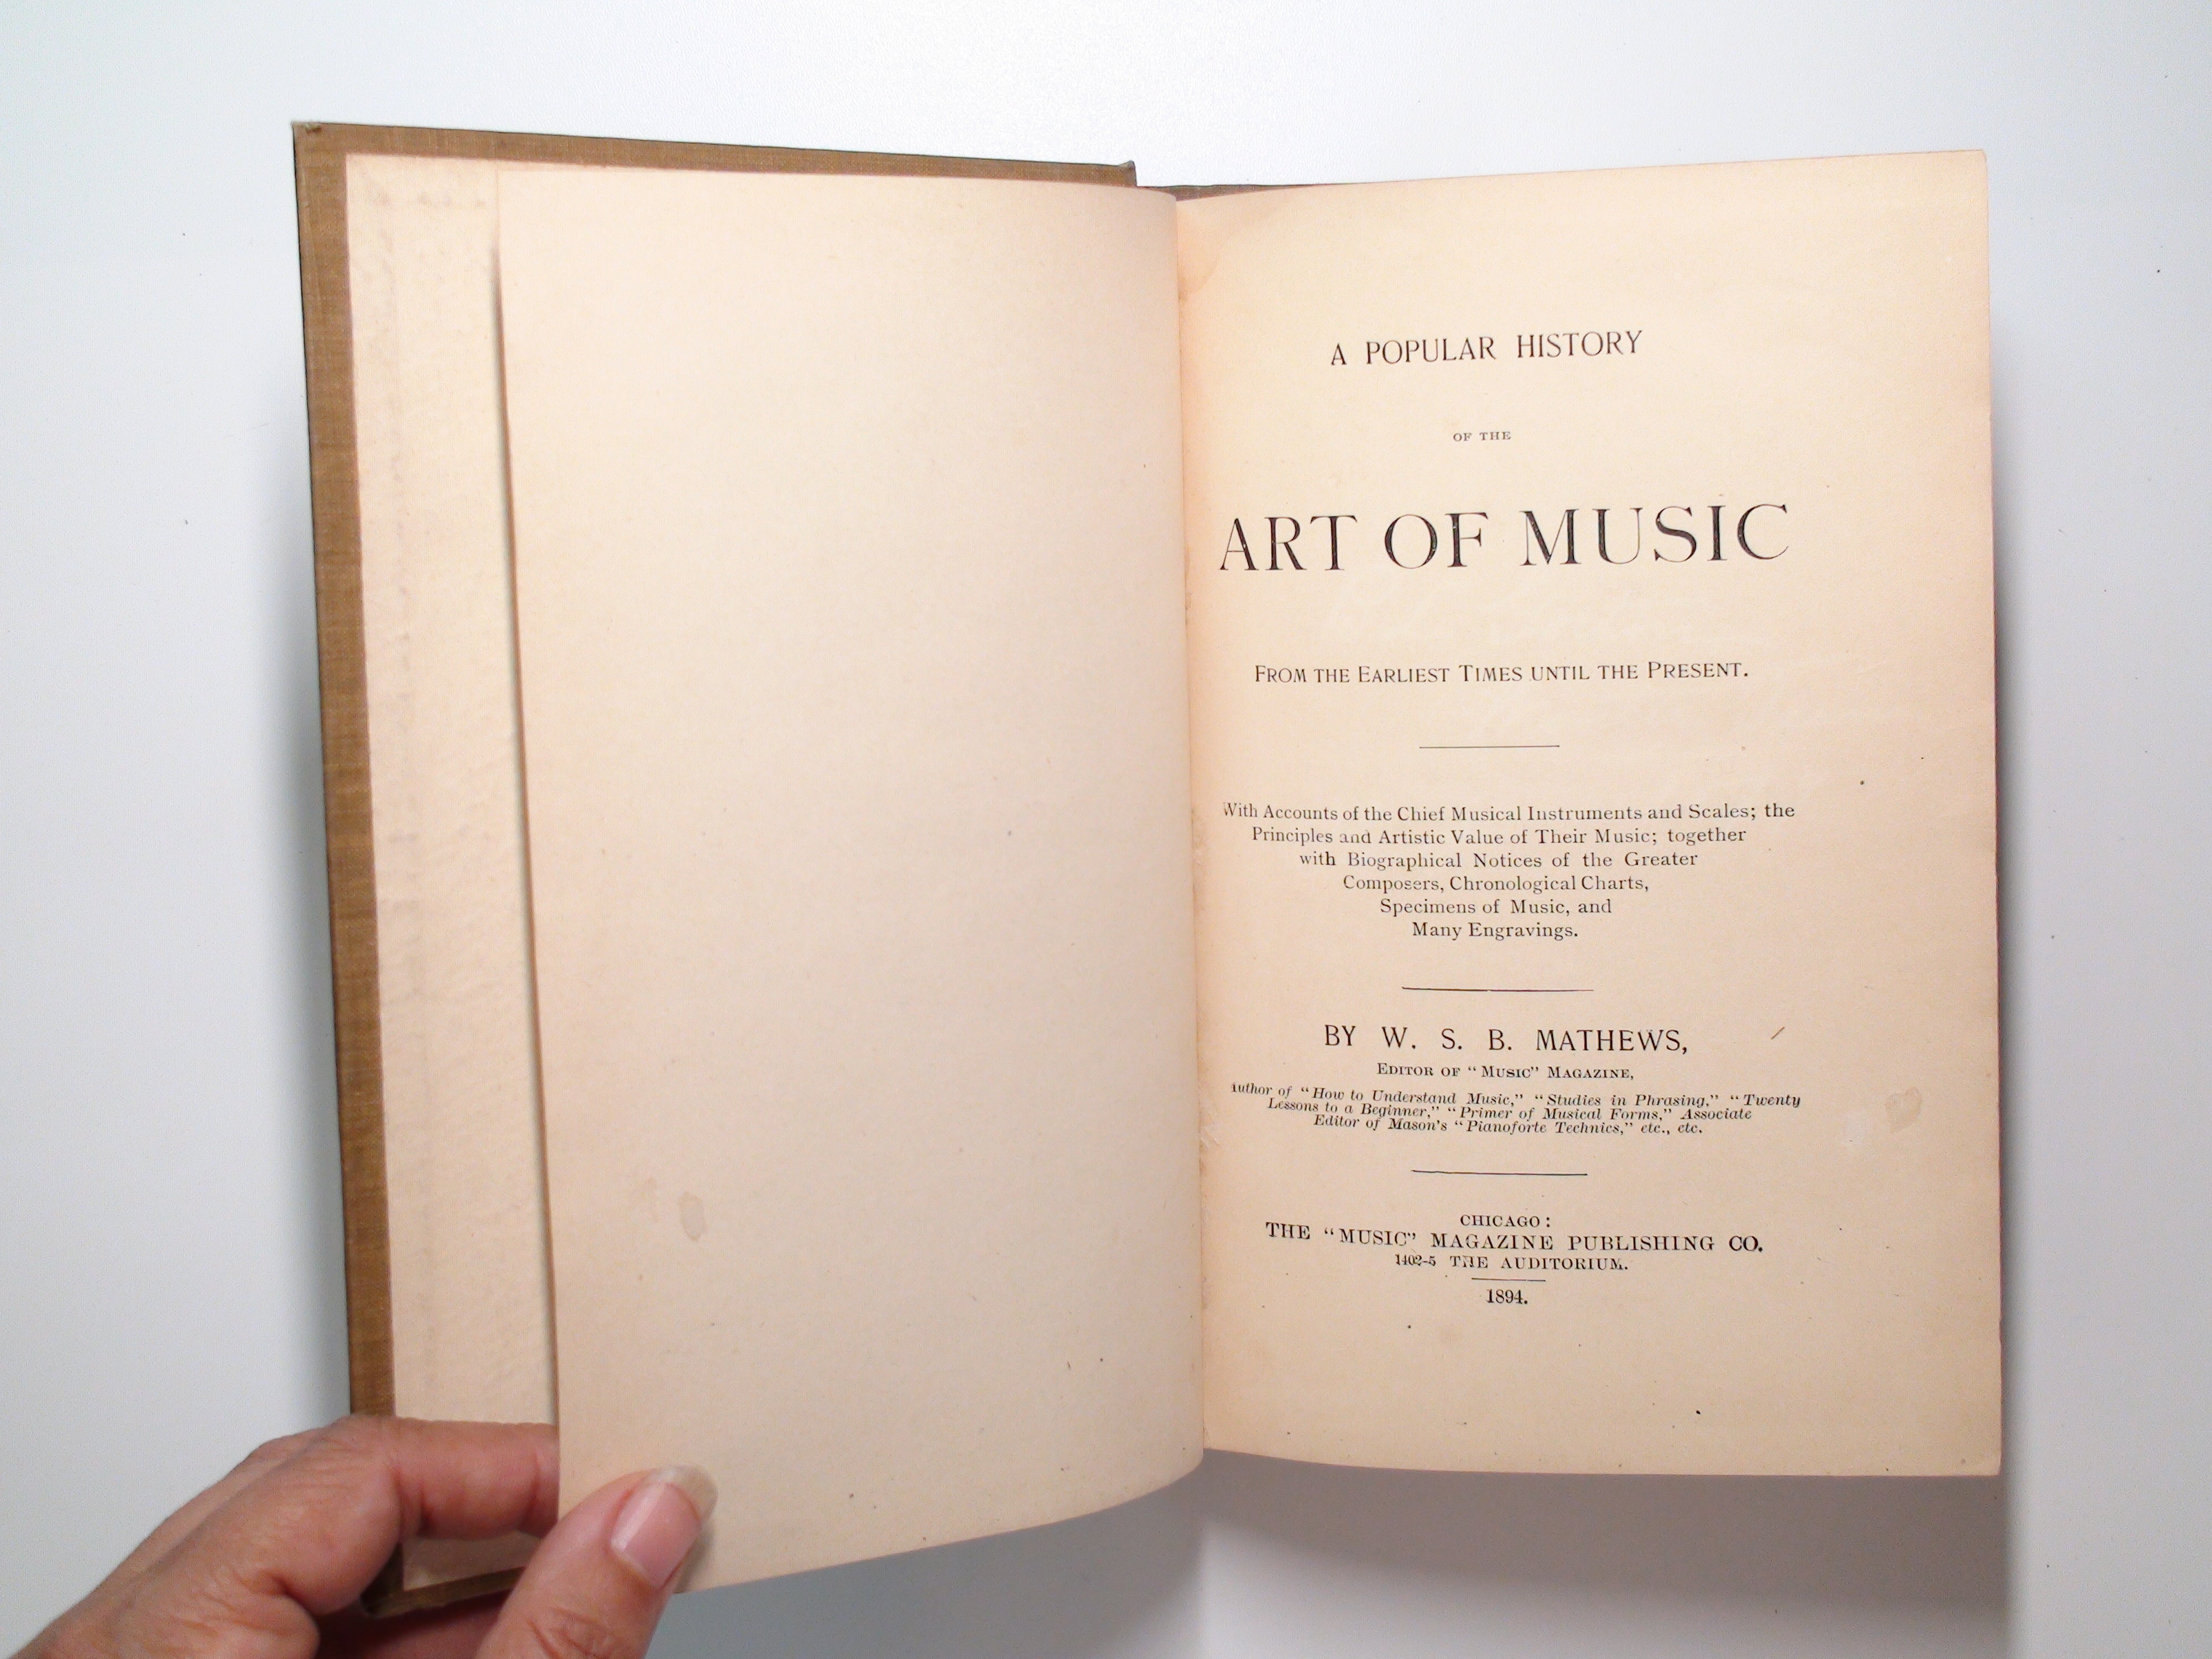 A Popular History of the Art of Music, by W. S. B. Mathews, Illustrated, 1894